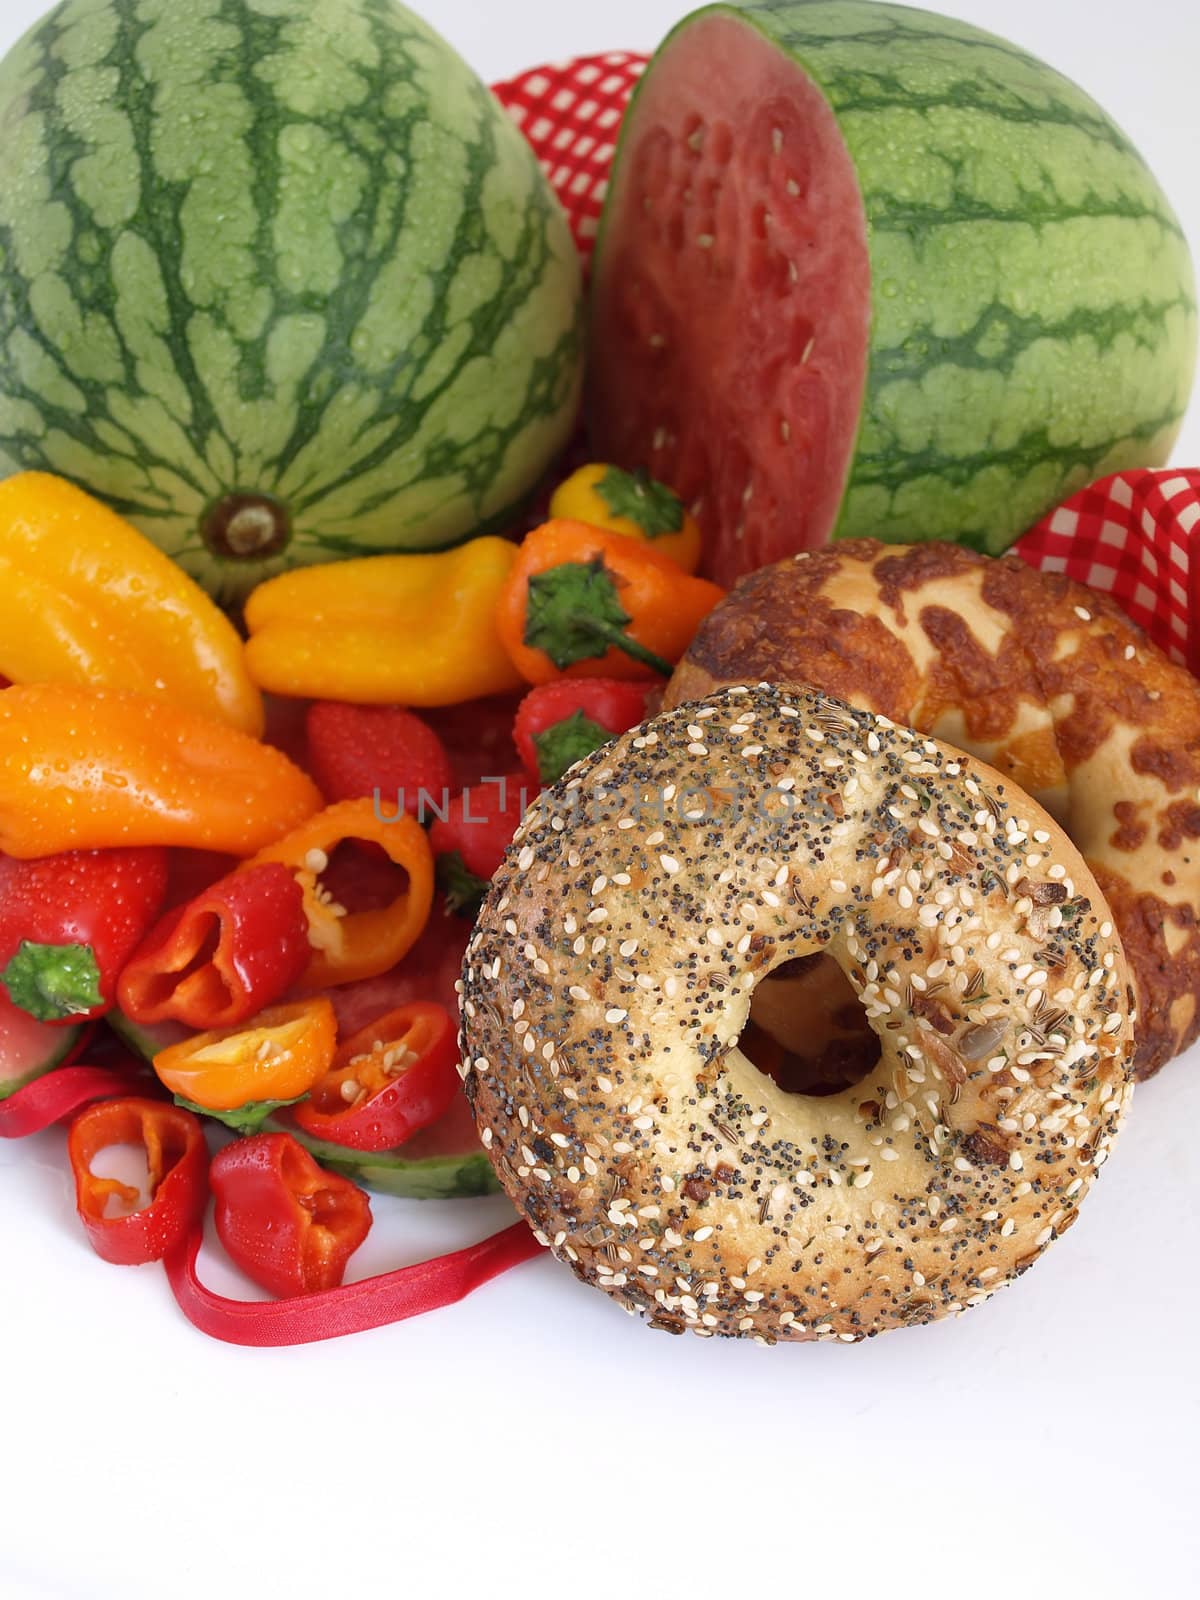 Beautiful red, orange and yellow peppers, ripe watermelon, and bagels set against a white background.